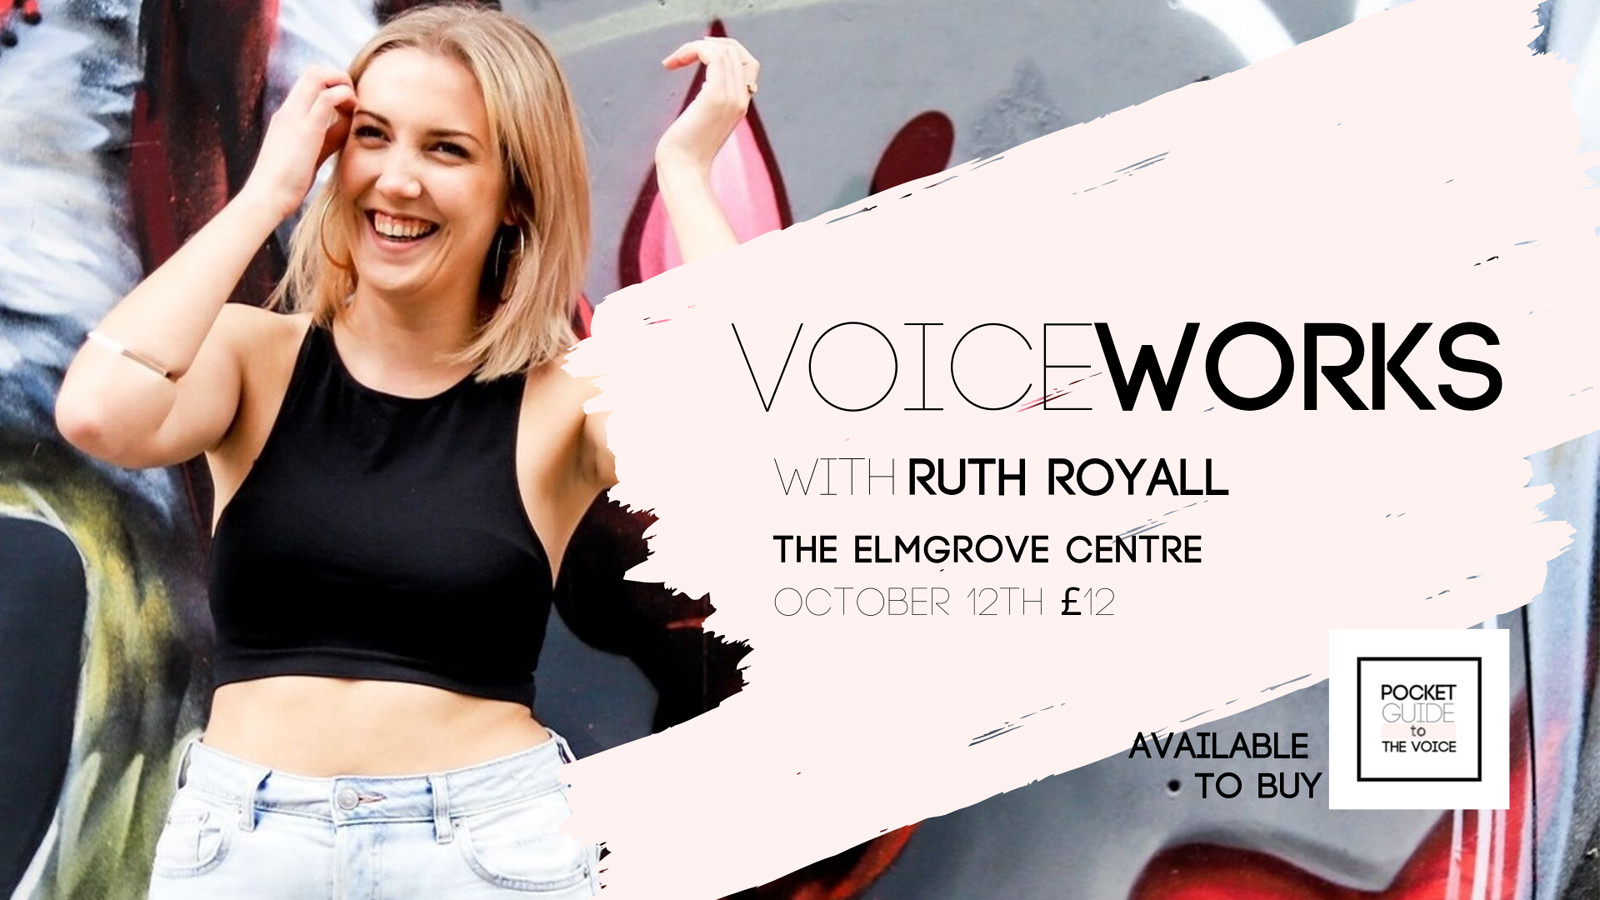 Voiceworks with Ruth Royall at Voiceworks with Ruth Royall